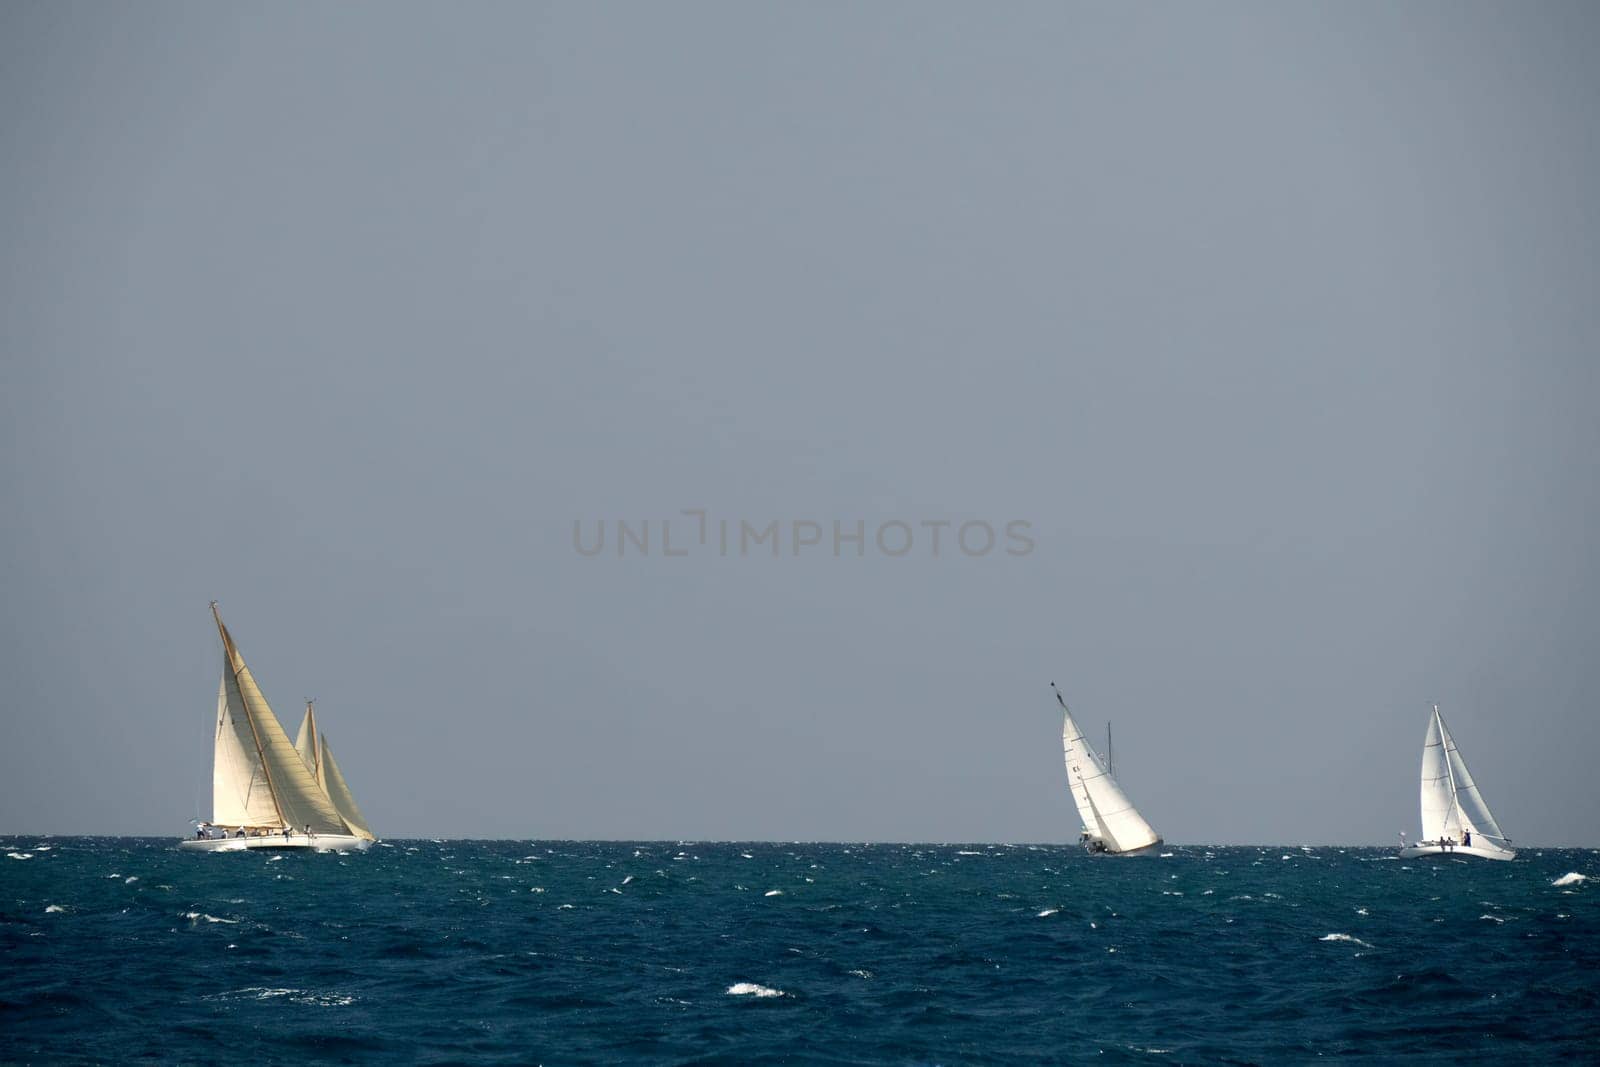 strong wind regatta in barcelona Sailing ship in a strong wind. Yachting by AndreaIzzotti